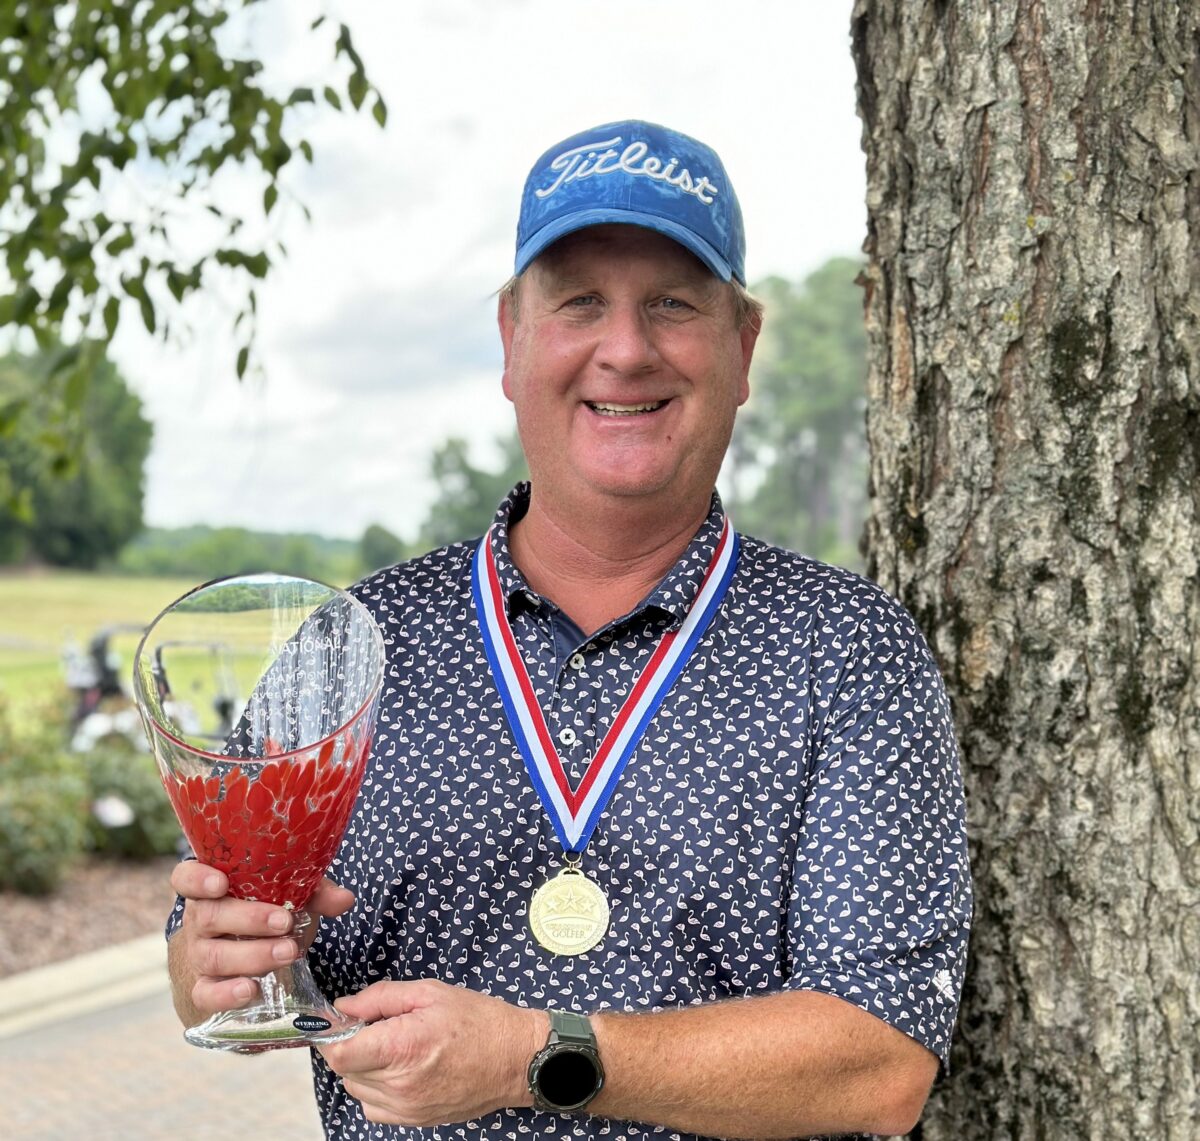 Trent Gregory wins Golfweek Senior National in a quick playoff, and he’s just getting started